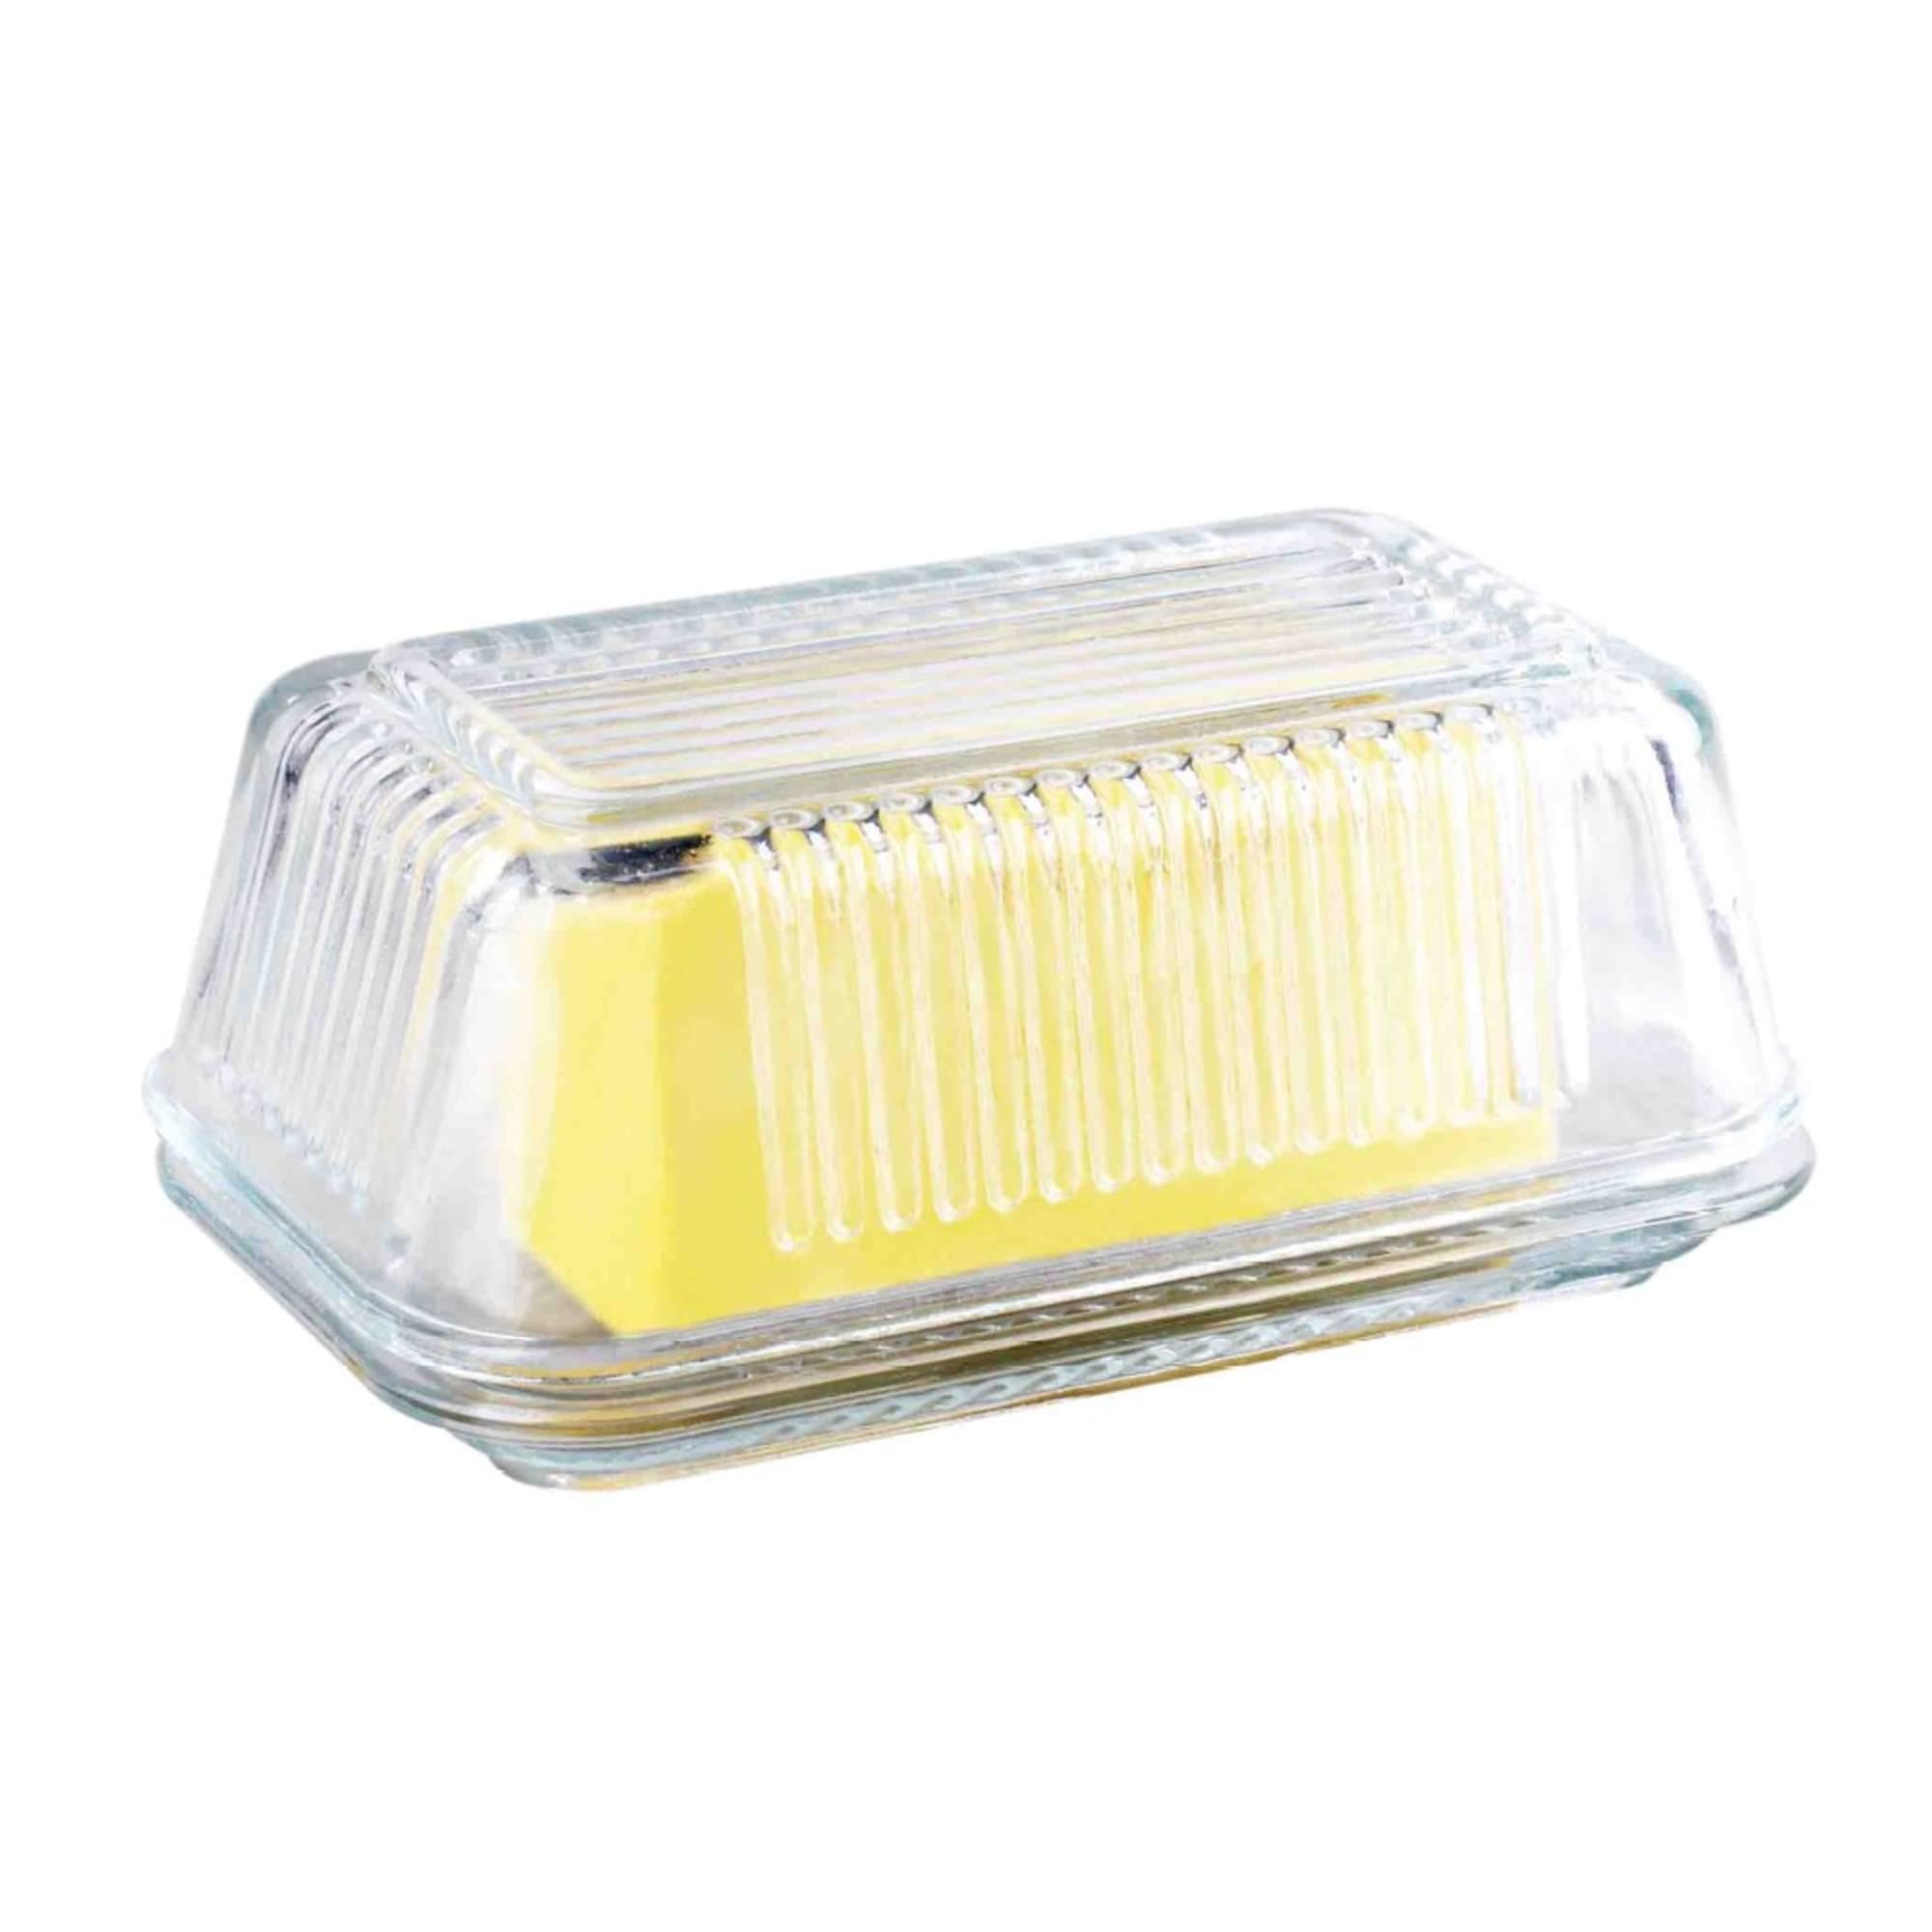 Home Basics Glass Butter Dish $6.00 EACH, CASE PACK OF 12